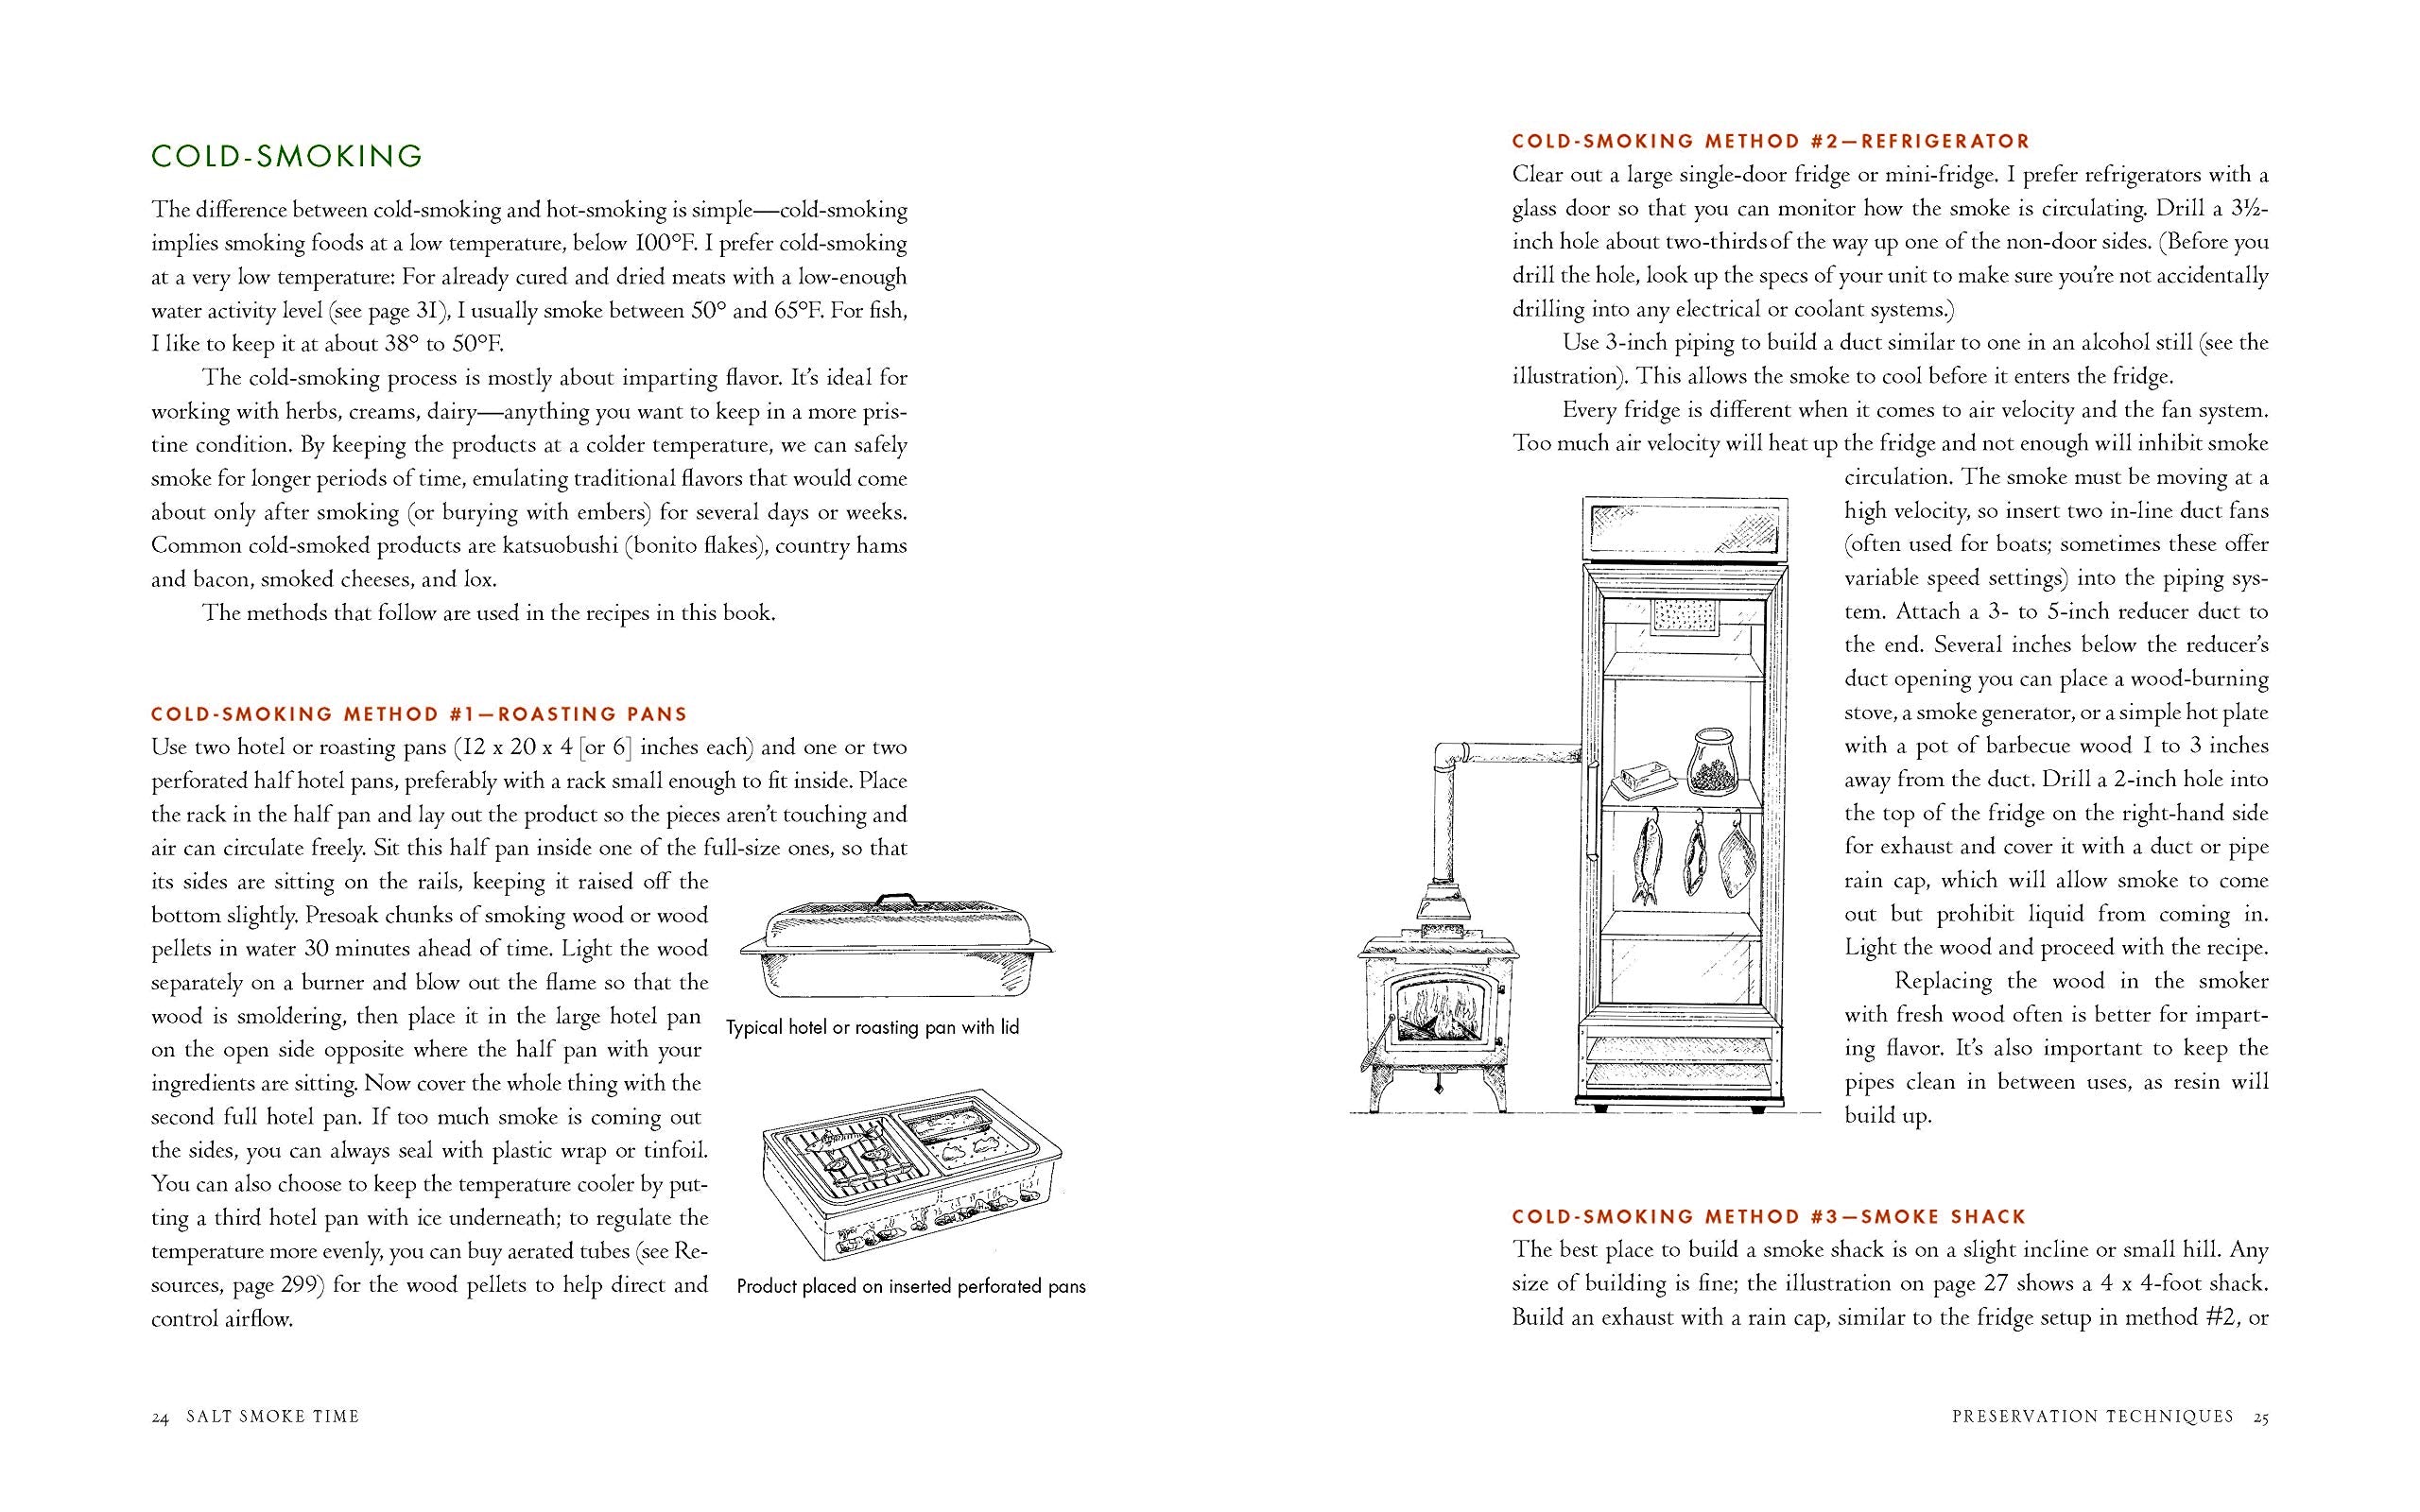 Salt Smoke Time: Homesteading and Heritage Techniques for the Modern Kitchen (Will Horowitz)